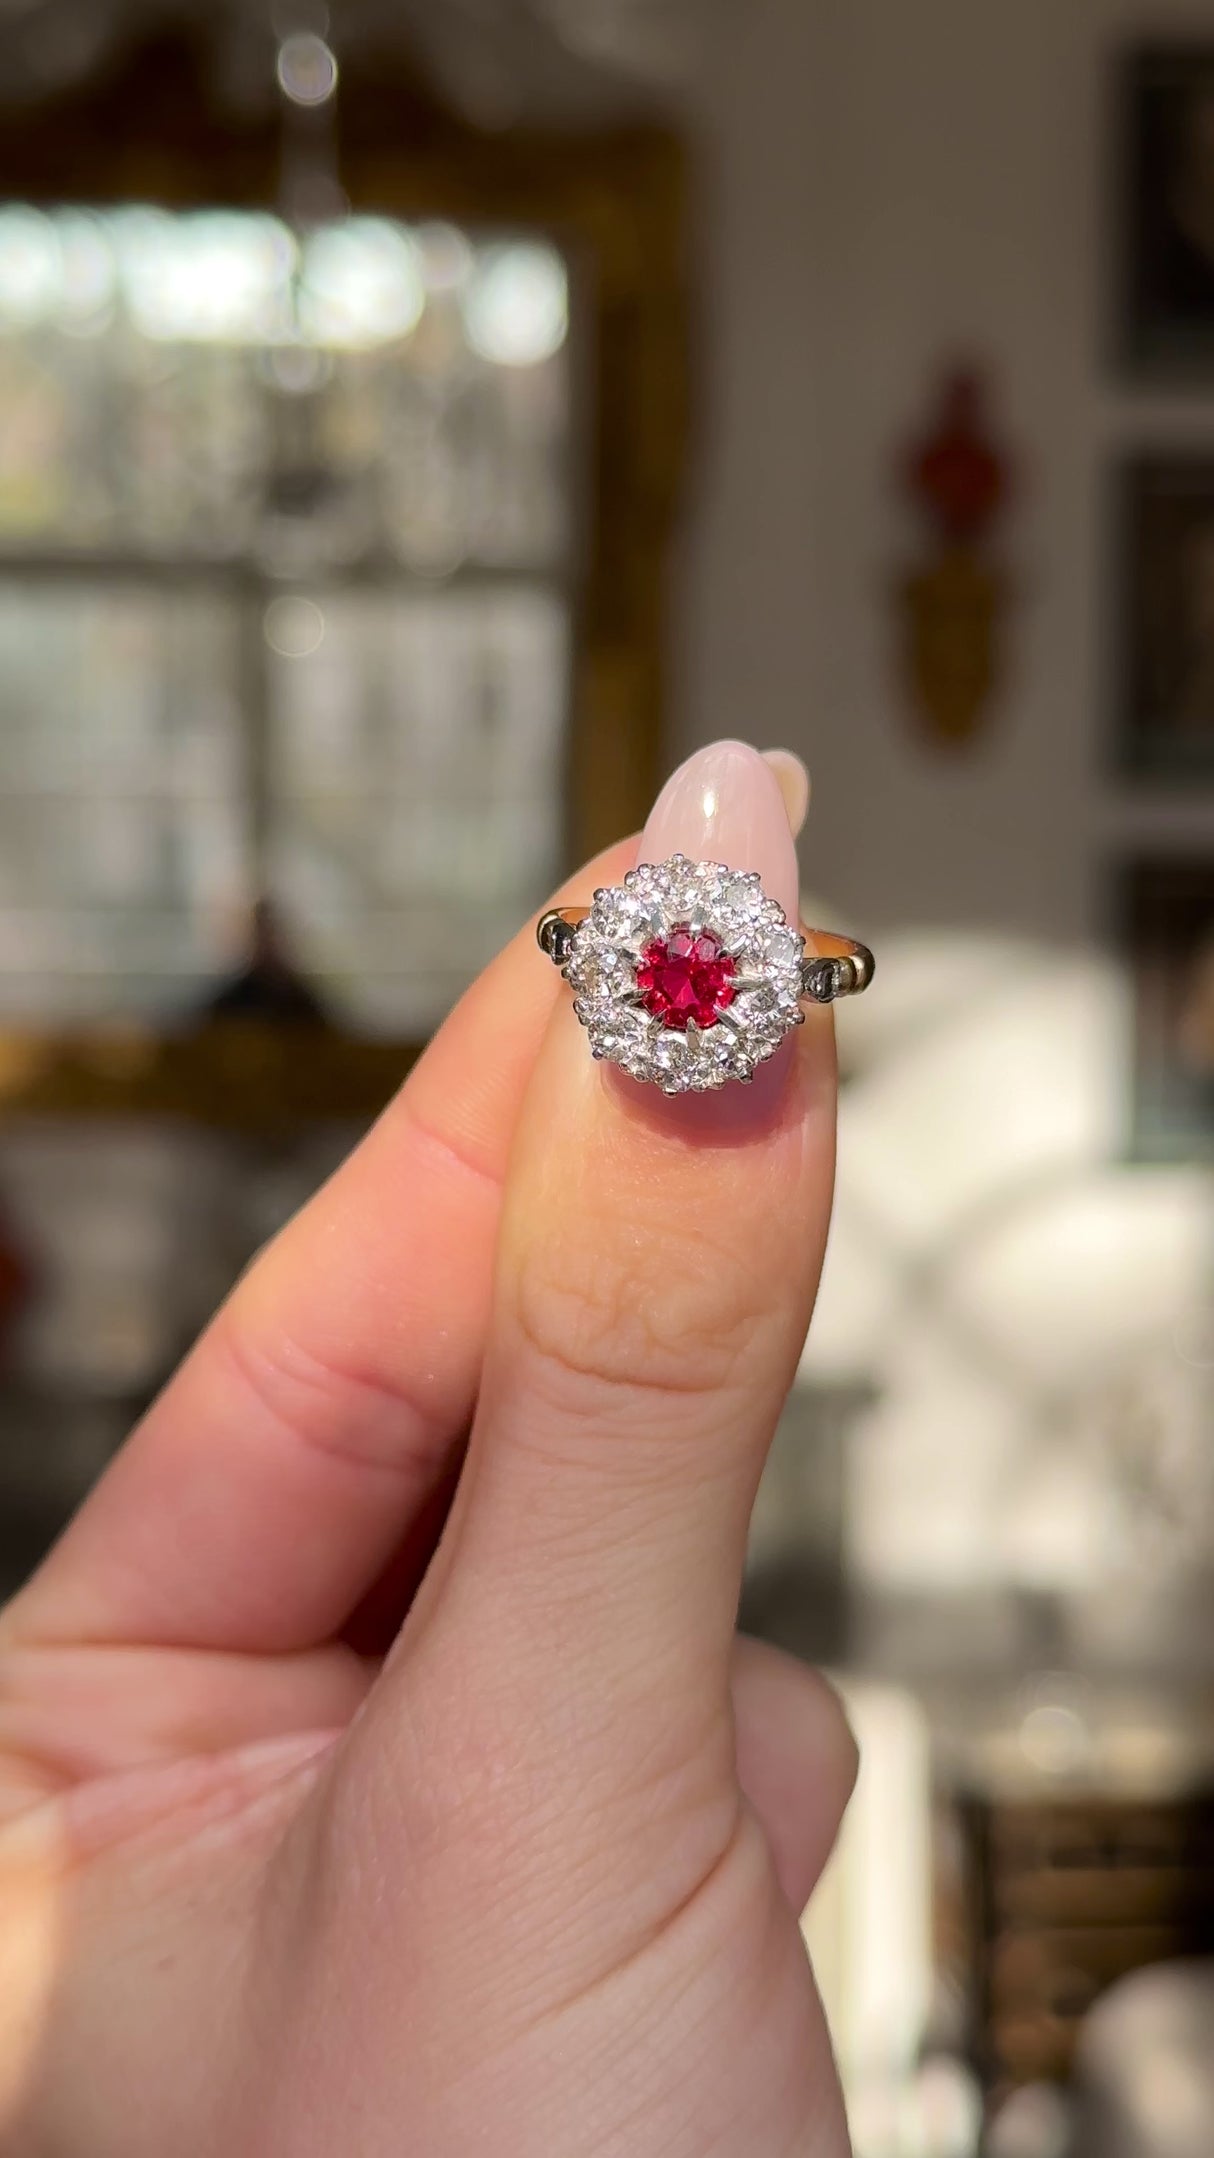 Antique victorian ruby and diamond cluster engagement ring held inf igners and moved around to give perspective.